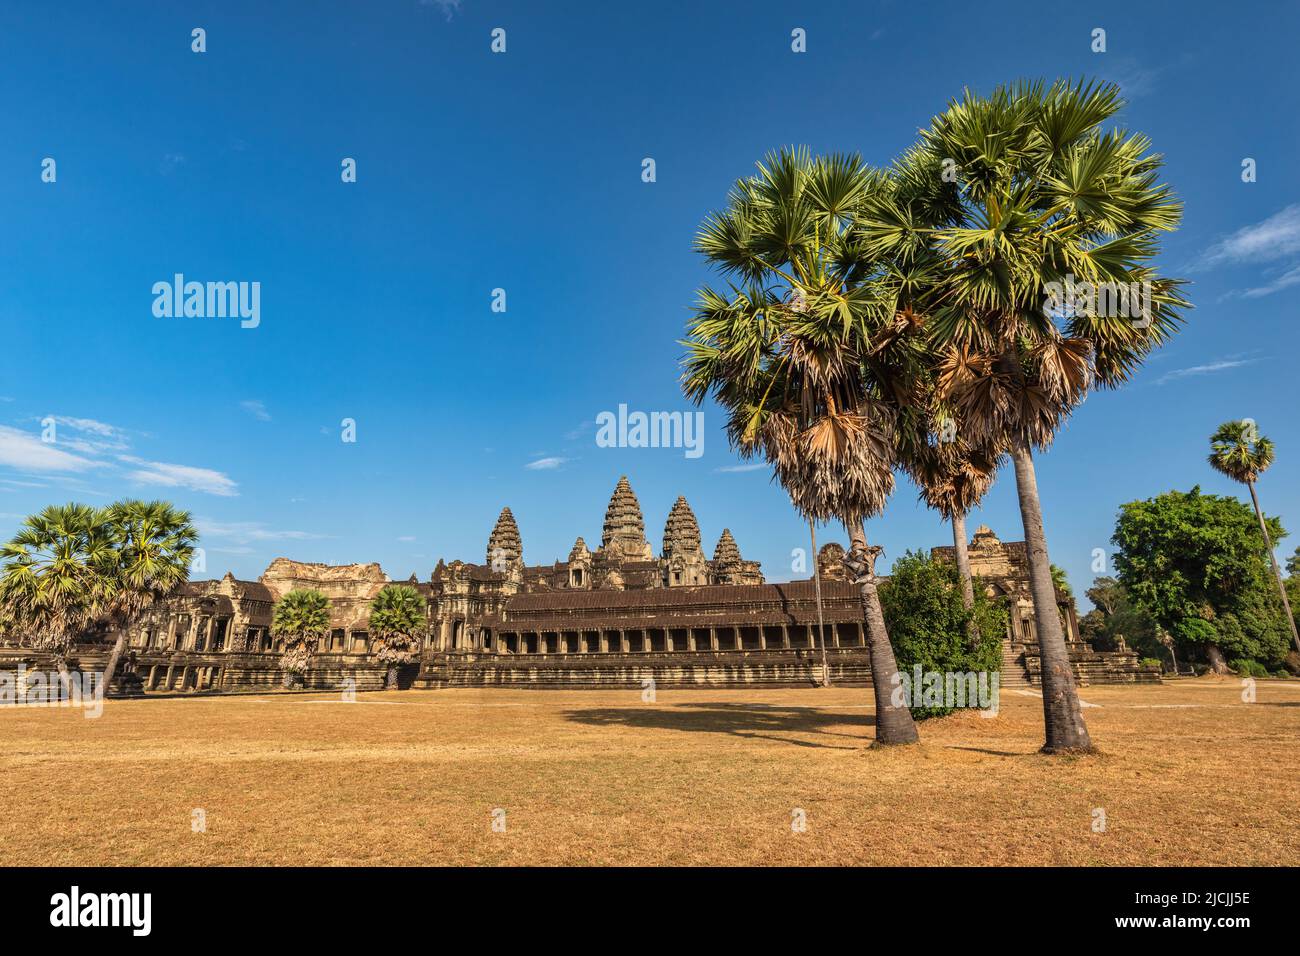 Siem Reap Cambodia, the famous Angkor Wat temple Stock Photo